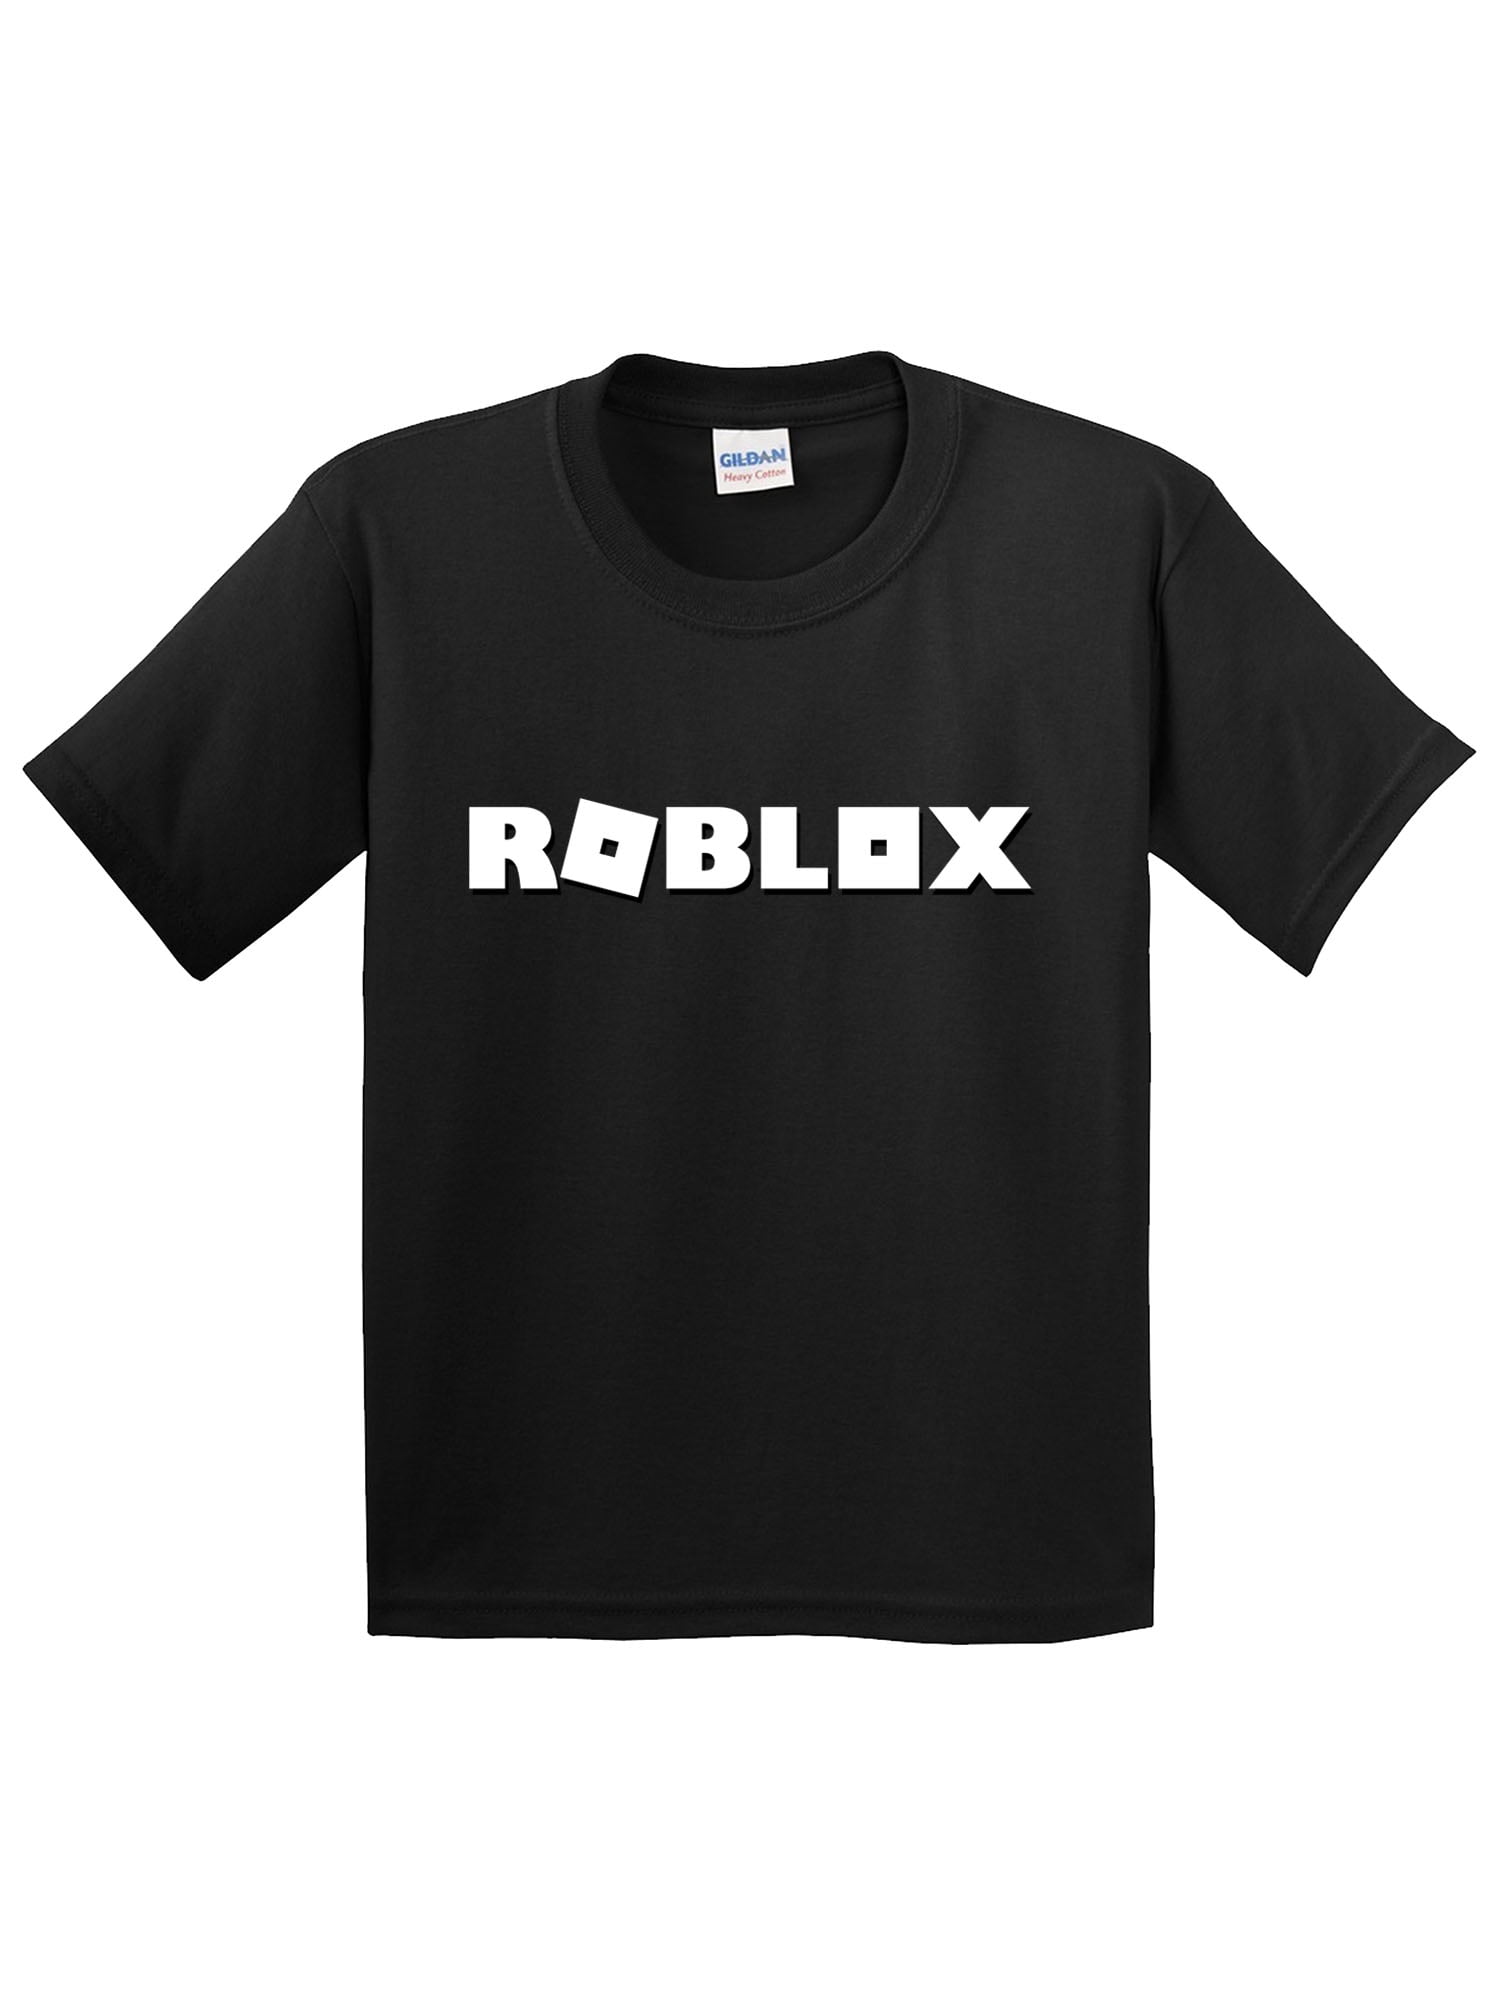 How To Make Your Own Roblox Shirt Polo T Shirts Outlet Official